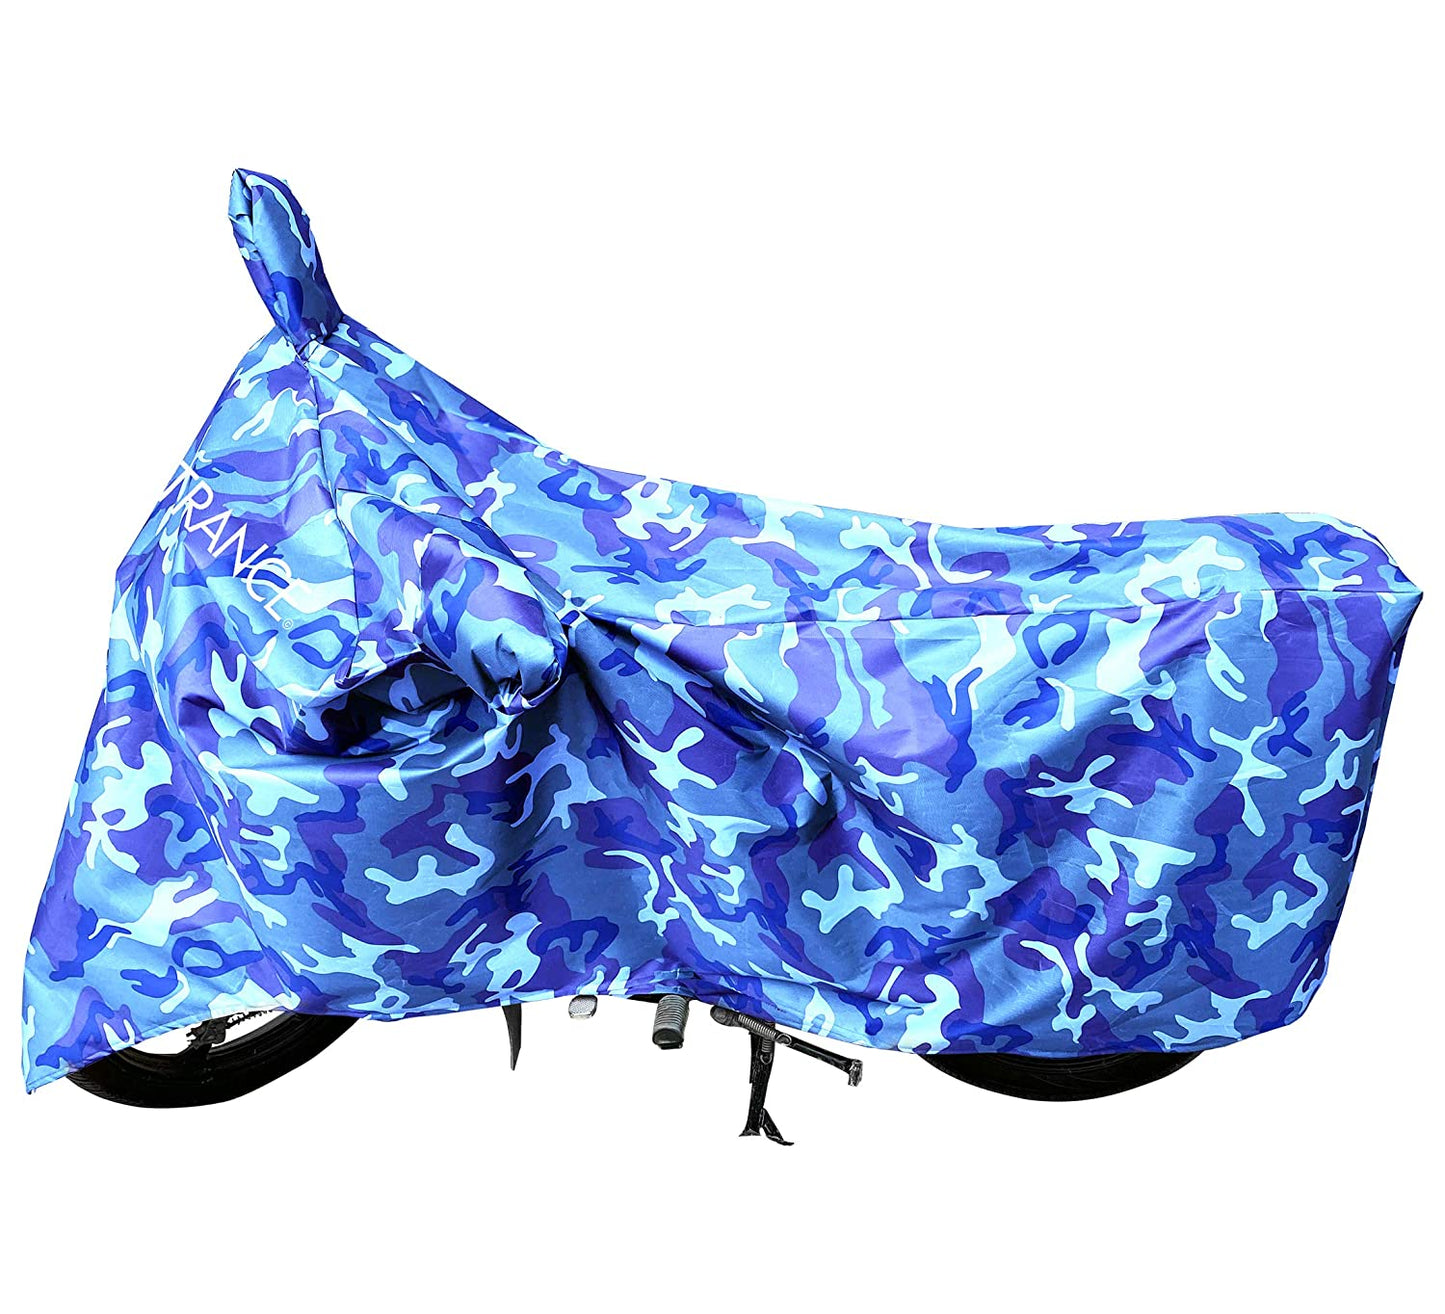 MotoTrance Jungle Bike Body Covers For Aprilia SR 125 - Interlock-Stitched Waterproof and Heat Resistant with Mirror Pockets